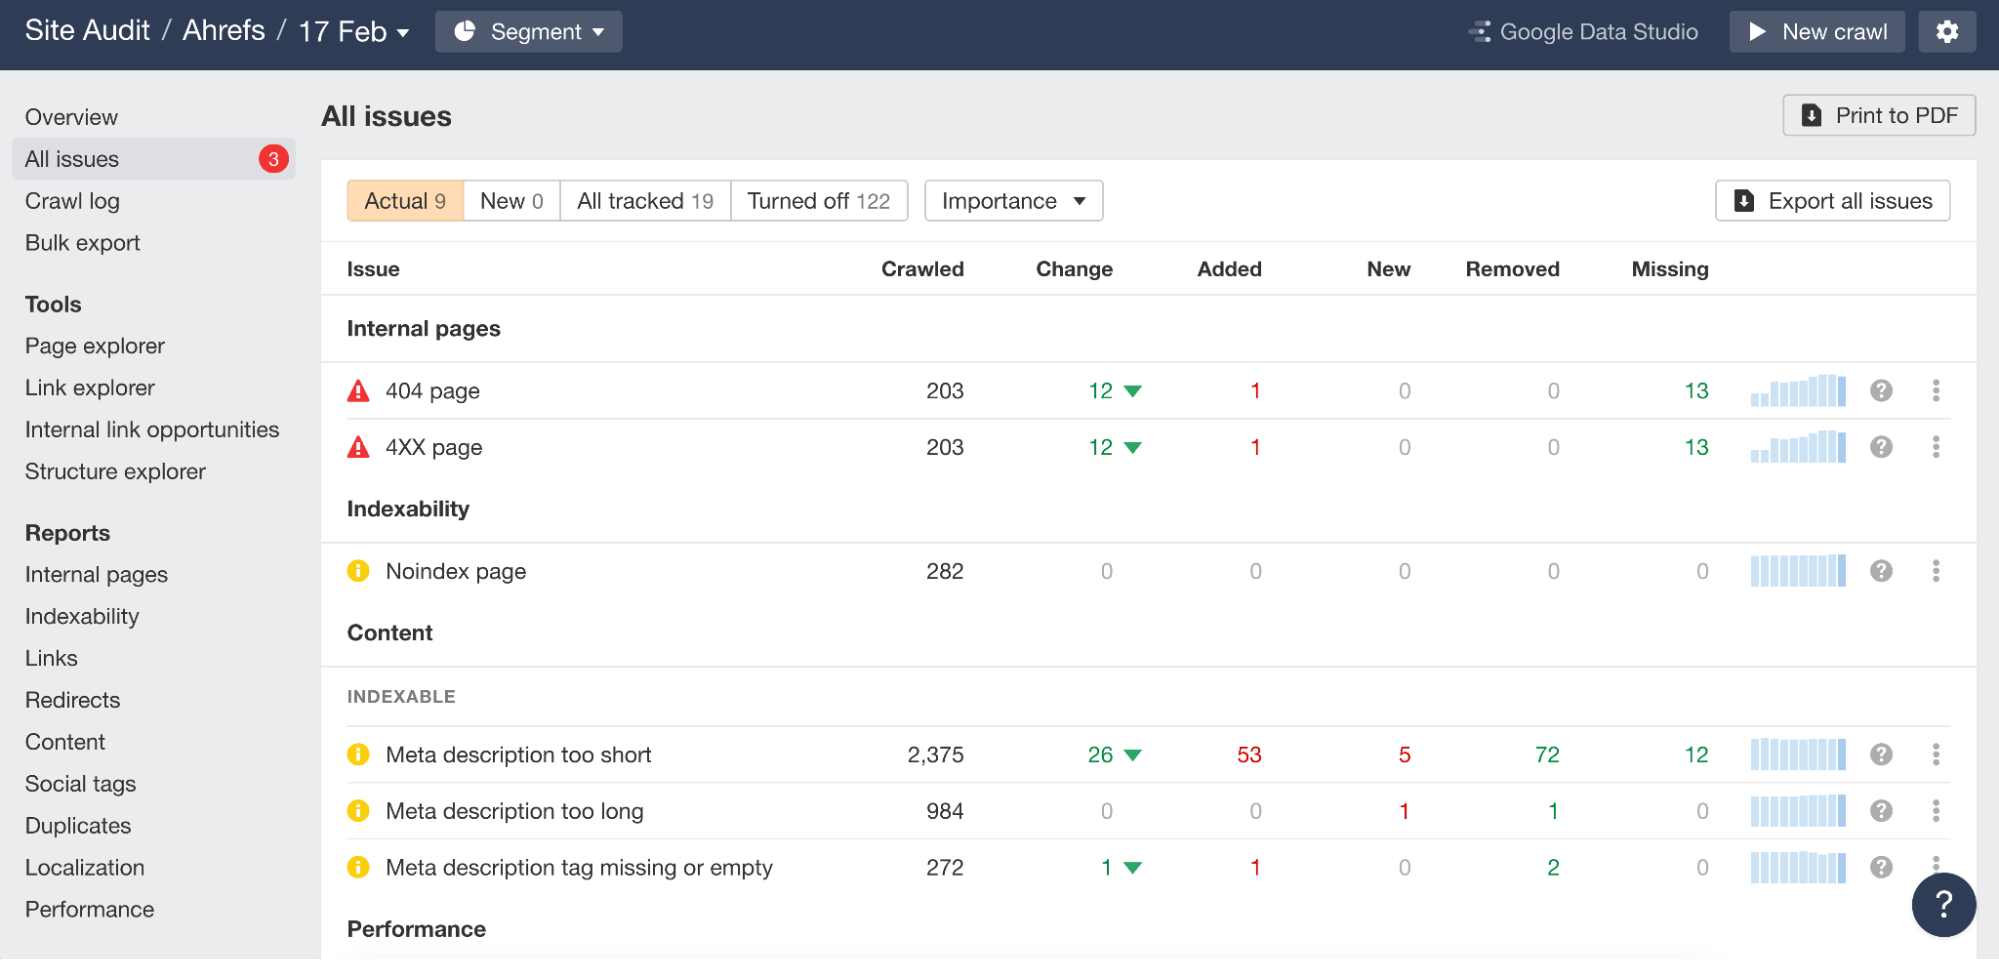 All issues report in Ahrefs' Site Audit